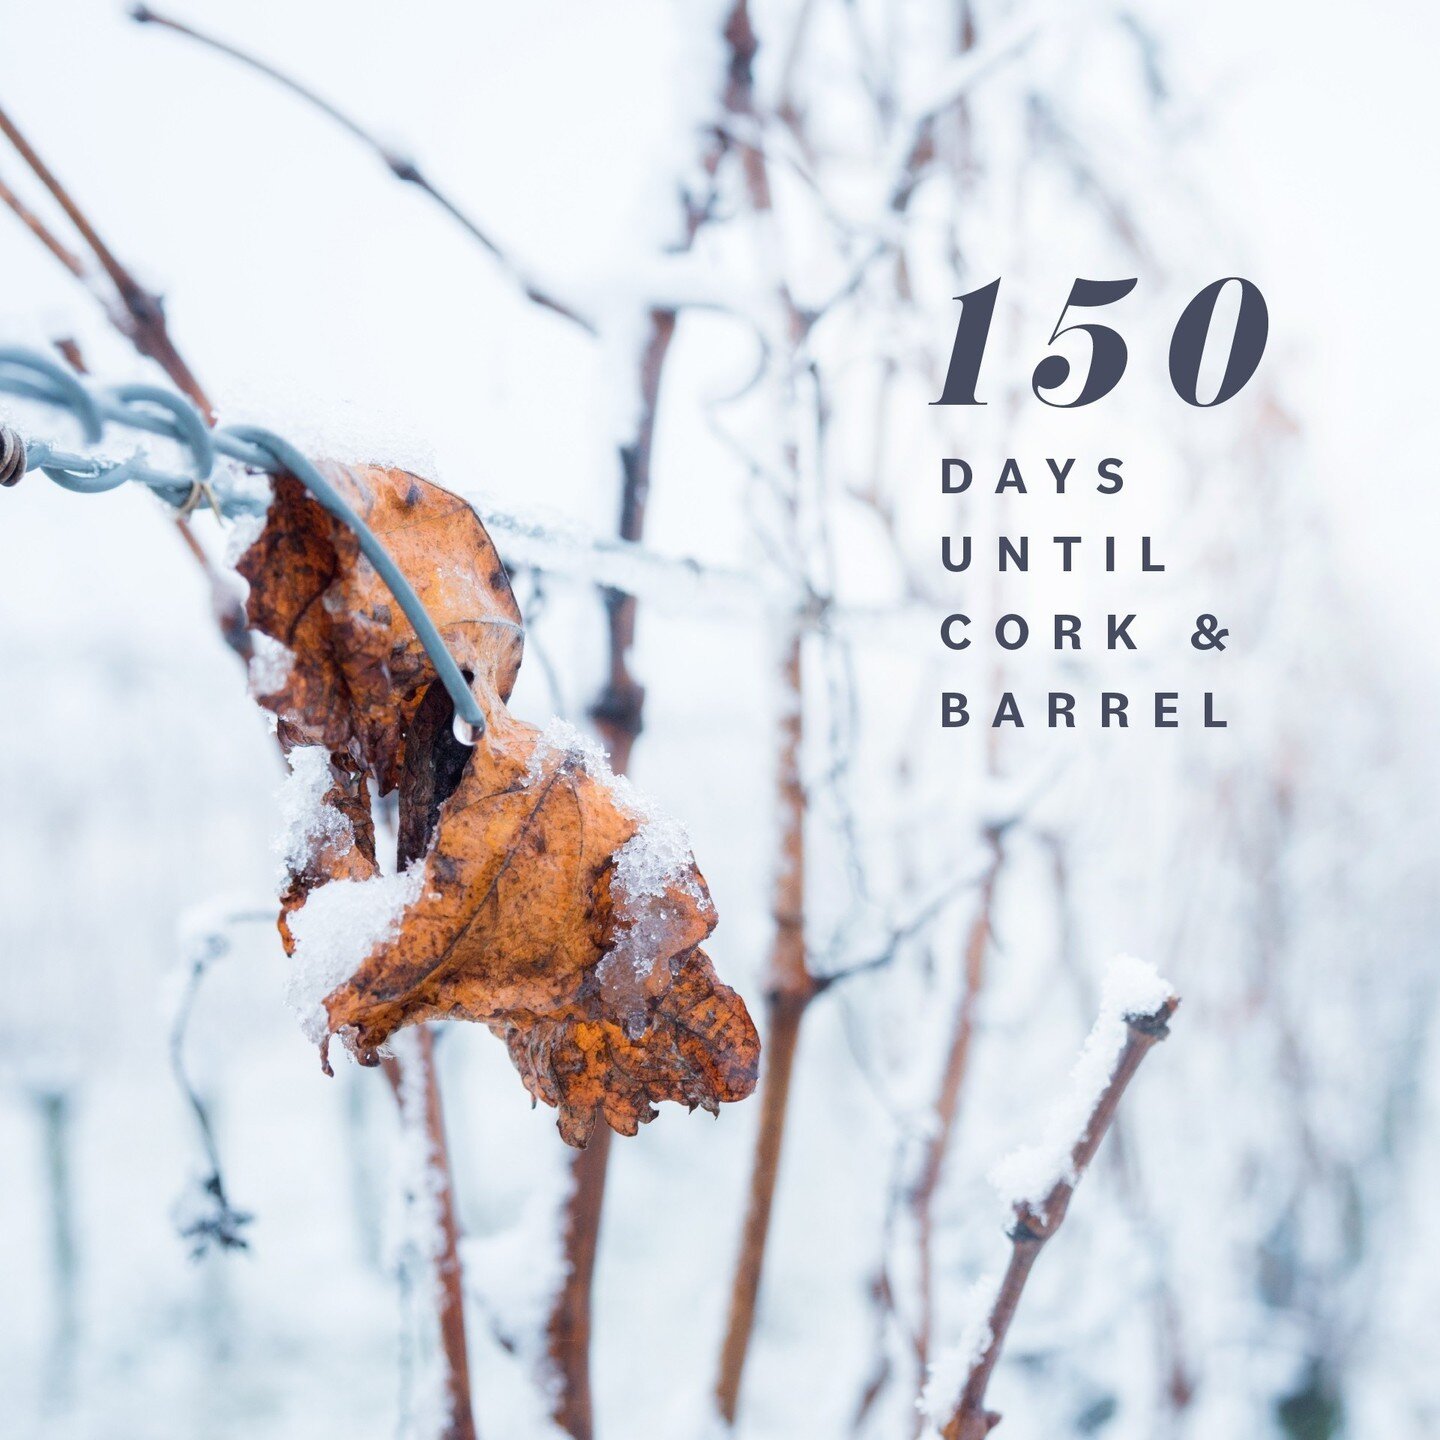 Summer is closer than you think! .Just 150 more days until Cork &amp; Barrel! ⁠
⁠
We're looking forward to an epic weekend with warm summer nights, good friends and great wine! ⁠
⁠
It's not too early to get your tickets! Head over to our linkin.bio!⁠